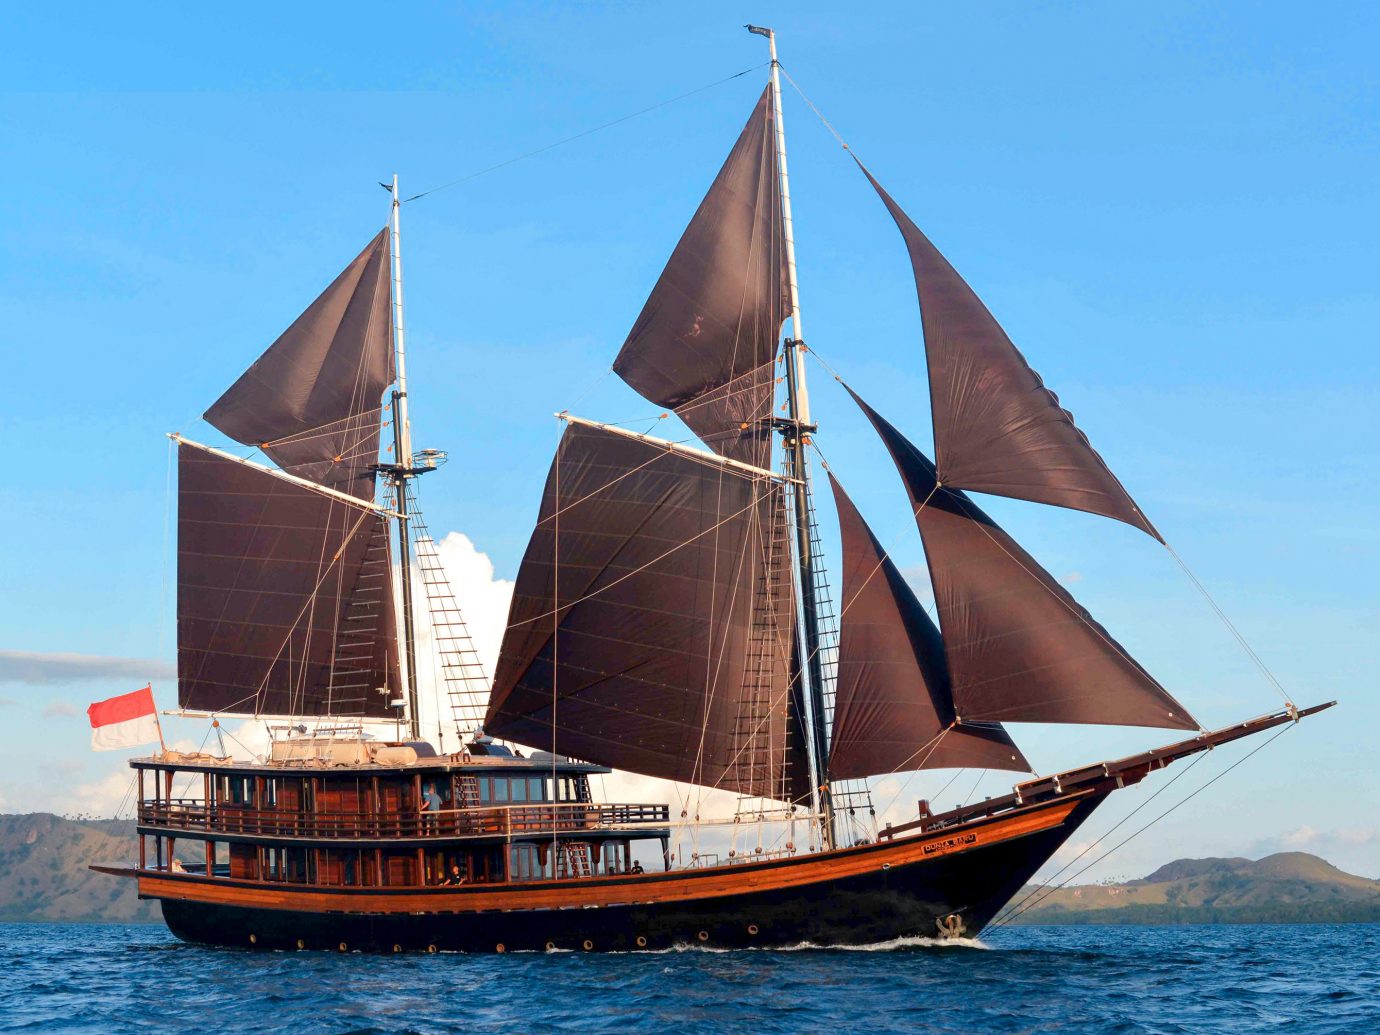 Luxury Travel Trip Ideas sailing ship tall ship water transportation brigantine ship caravel barquentine galeas schooner watercraft brig barque baltimore clipper sloop of war ship of the line sailboat carrack windjammer yawl Boat sail ship replica full rigged ship first rate manila galleon lugger training ship dhow cat ketch east indiaman sloop galleon galley fluyt flagship galiot skipjack sailing clipper